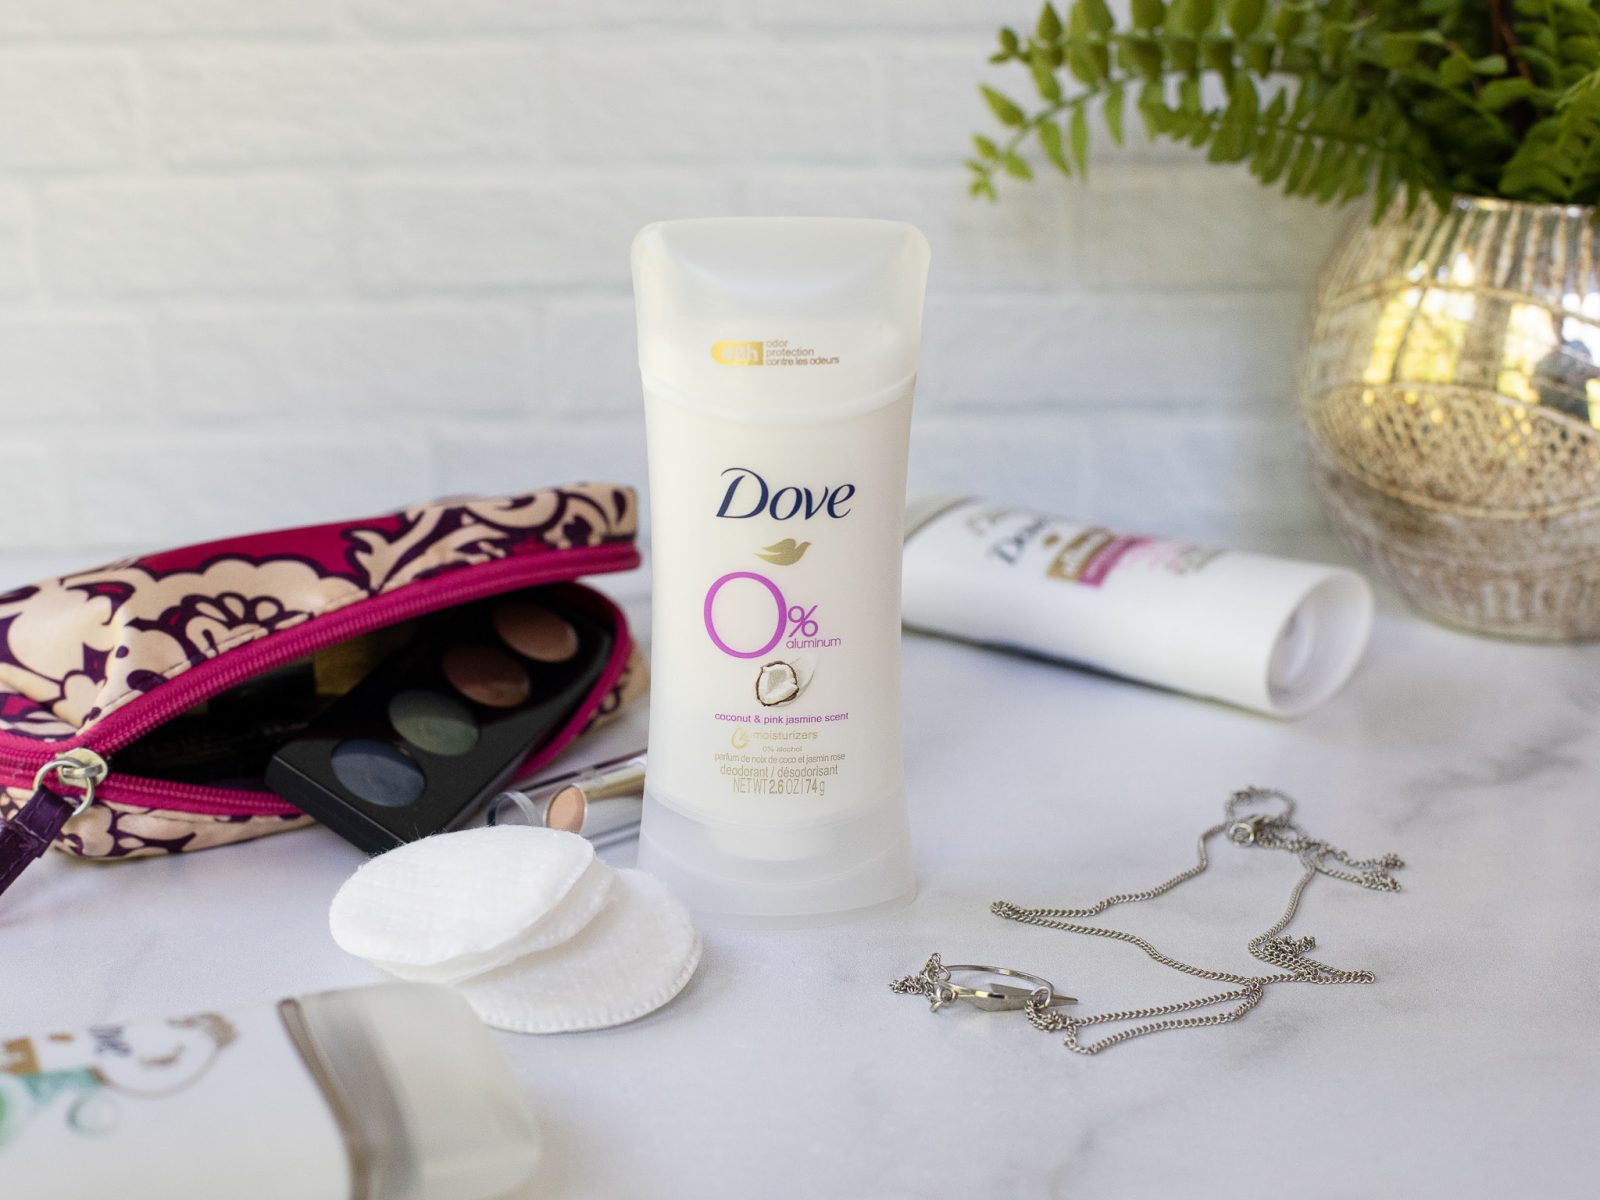 Get Effective Odor Protection For Up to 48-Hours with Dove 0% Aluminum Deodorant Stick – Save BIG At Publix